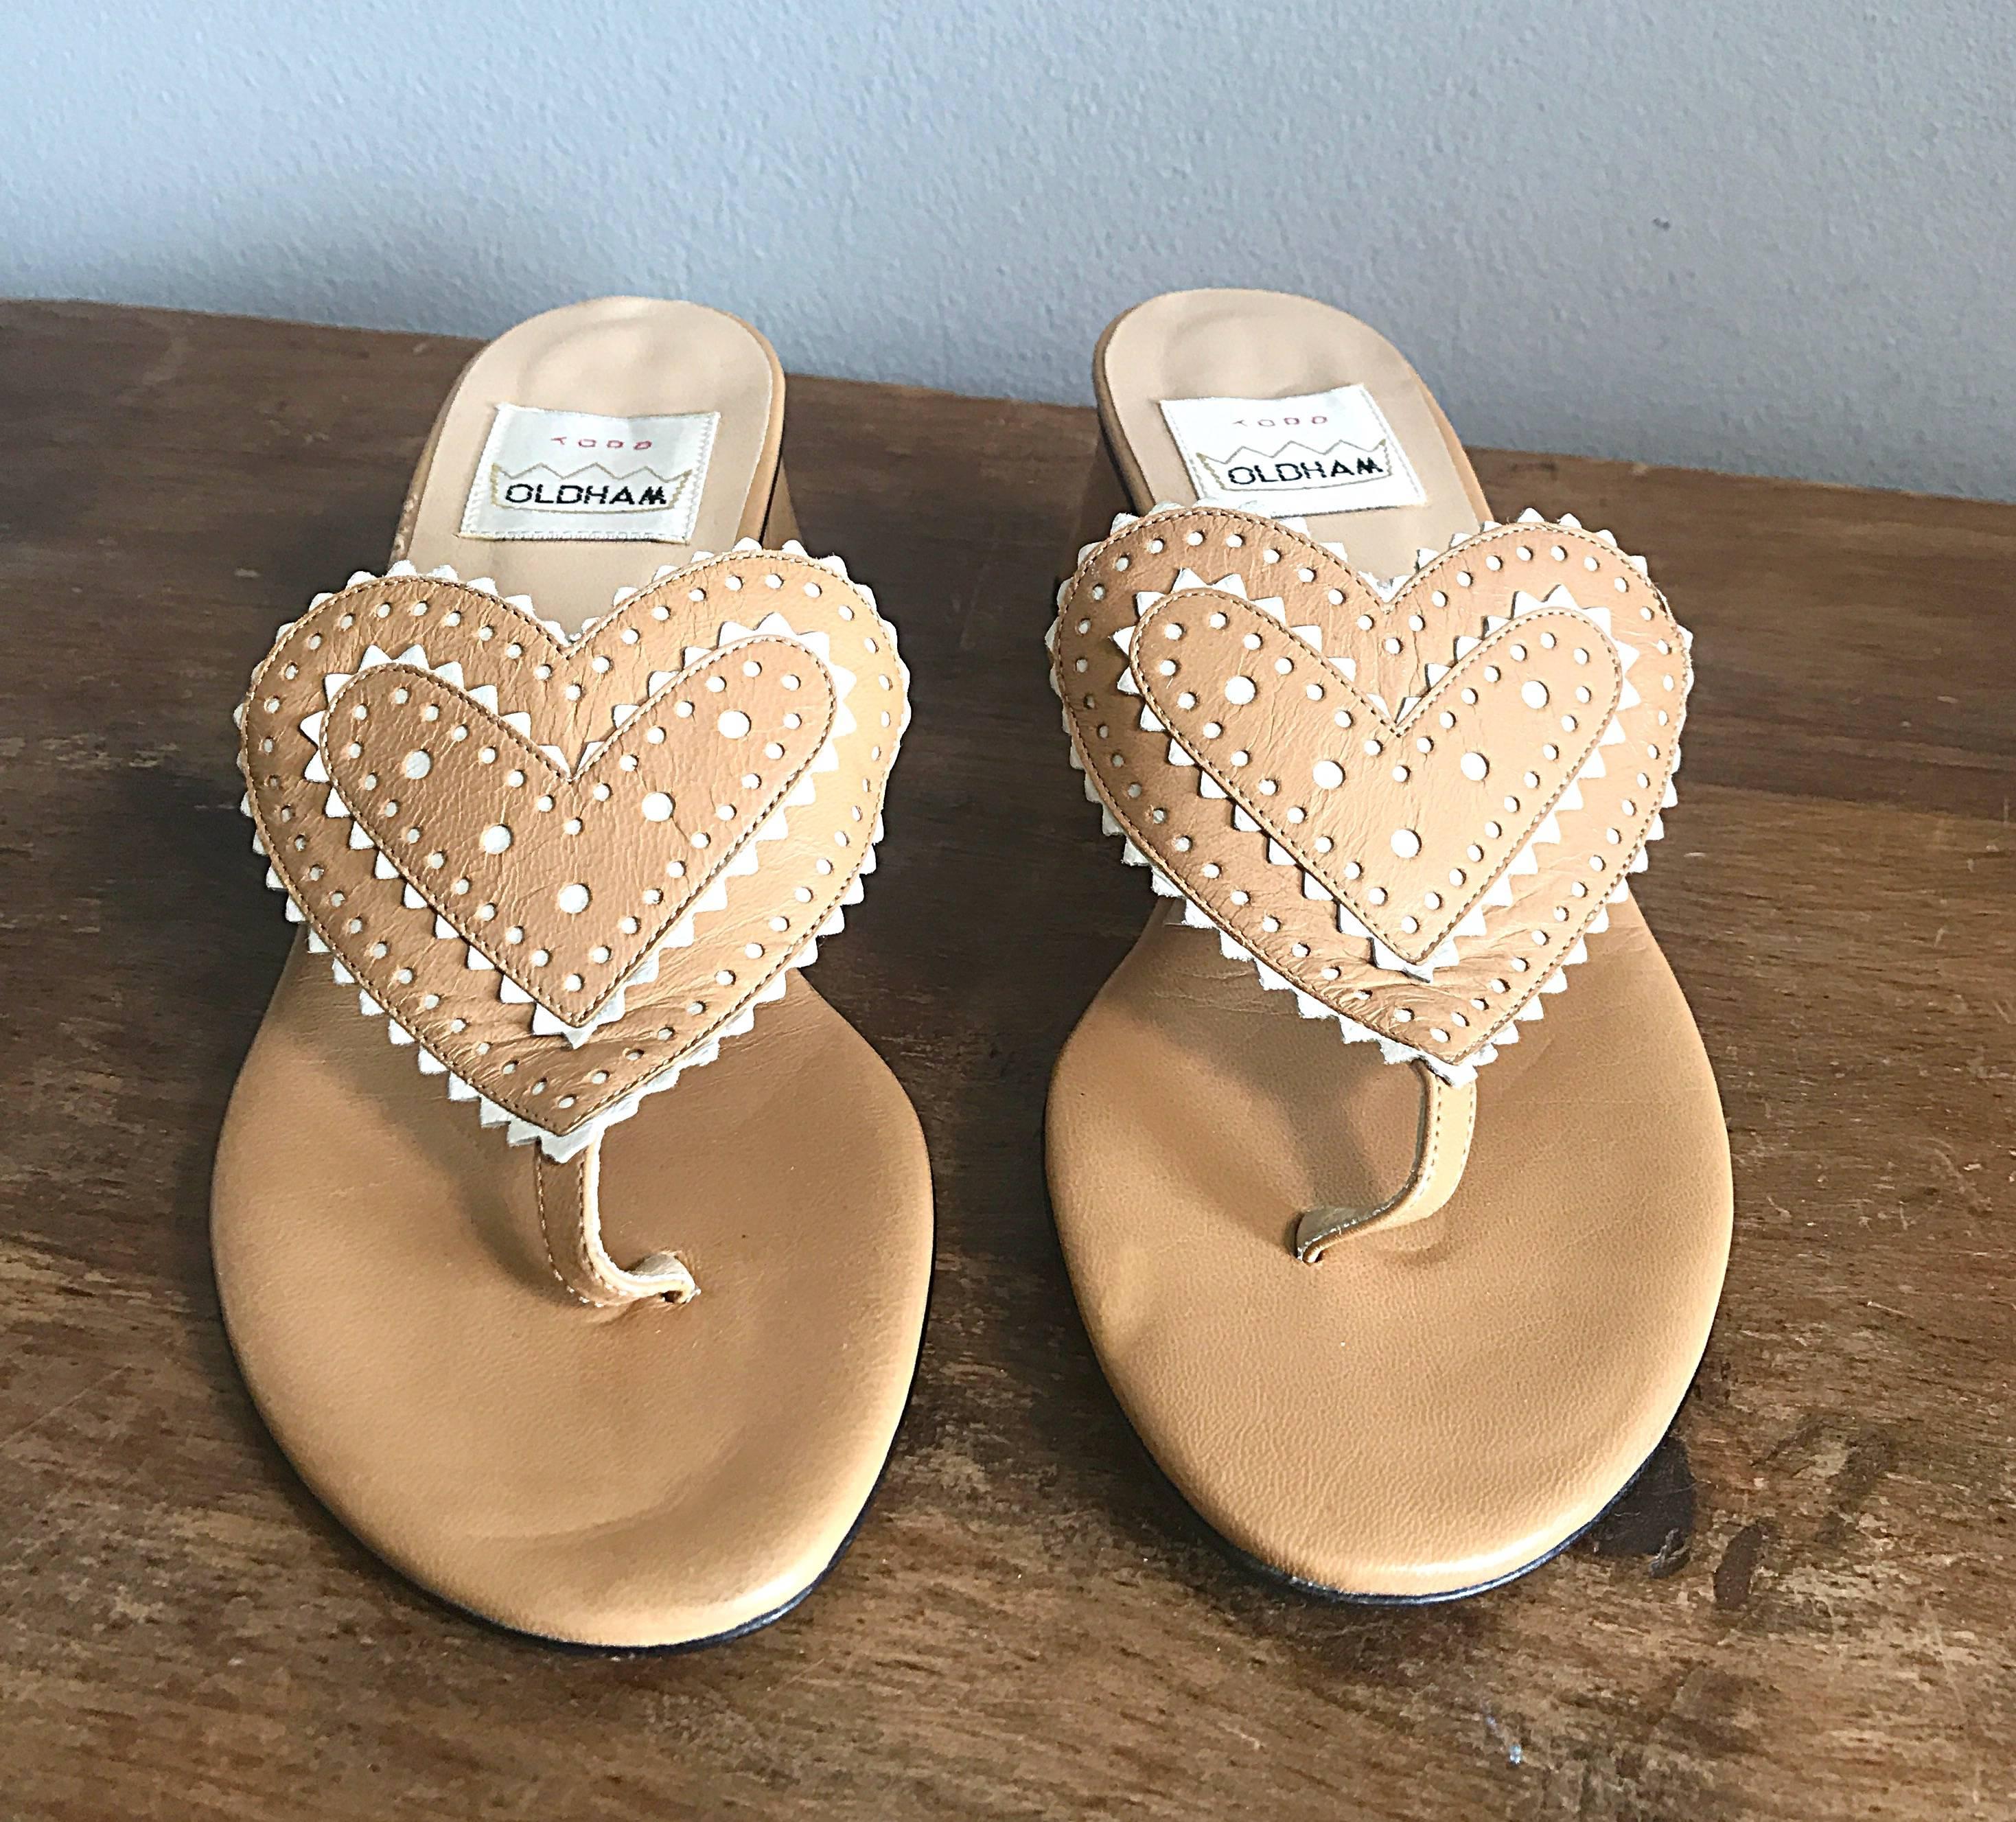 Collectible and brand new vintage 90s TODD OLDHAM Avant Garde tan and ivory mid block heel leather thong sandals! Features a heart shaped toe / foot strap with perforated tan and ivory leather. Avant Garde angled block heel. Super comfortable, and